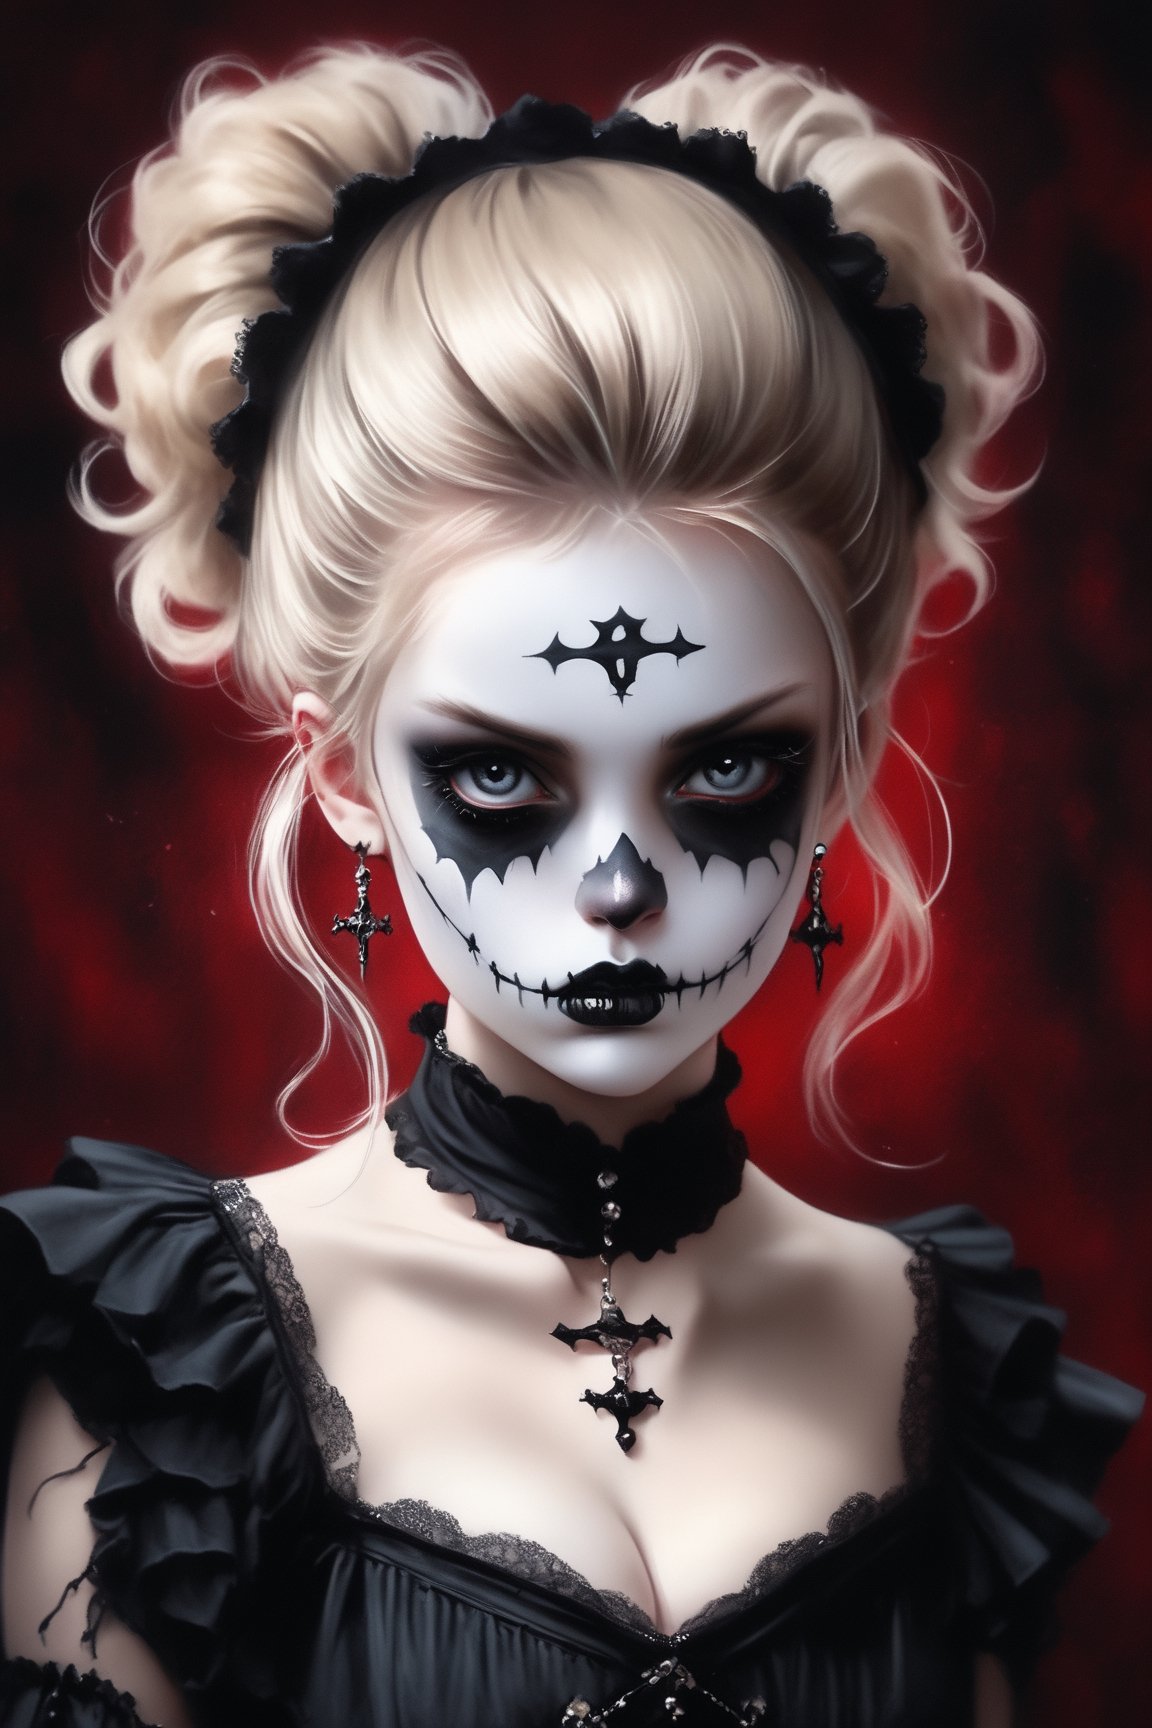 1girl, with black and white makeup, trending on deviantart, gothic art, grotesque, (maddi_devey_model, PICTURE ON LEVELS, marbled skin, ruffled upward hair, blonde hair, bangs, small skull earring, small breasts, photorealistic, gothic, goths, dark and mysterious, dark red background, dull: 1)!, flowing, sharp focus, beautiful, epic composition, refined, sovereign, creative, winning, perfect, pretty, attractive, singular, romantic gothic, cinematic, complex, thought, extremely, focused, graceful, light, extremely coherent Photorealistic, realistic, Canon 5D Mark IV 85mm f/1.8, realistic eyes, detailed eyes, ((upper body view))
,detailmaster2